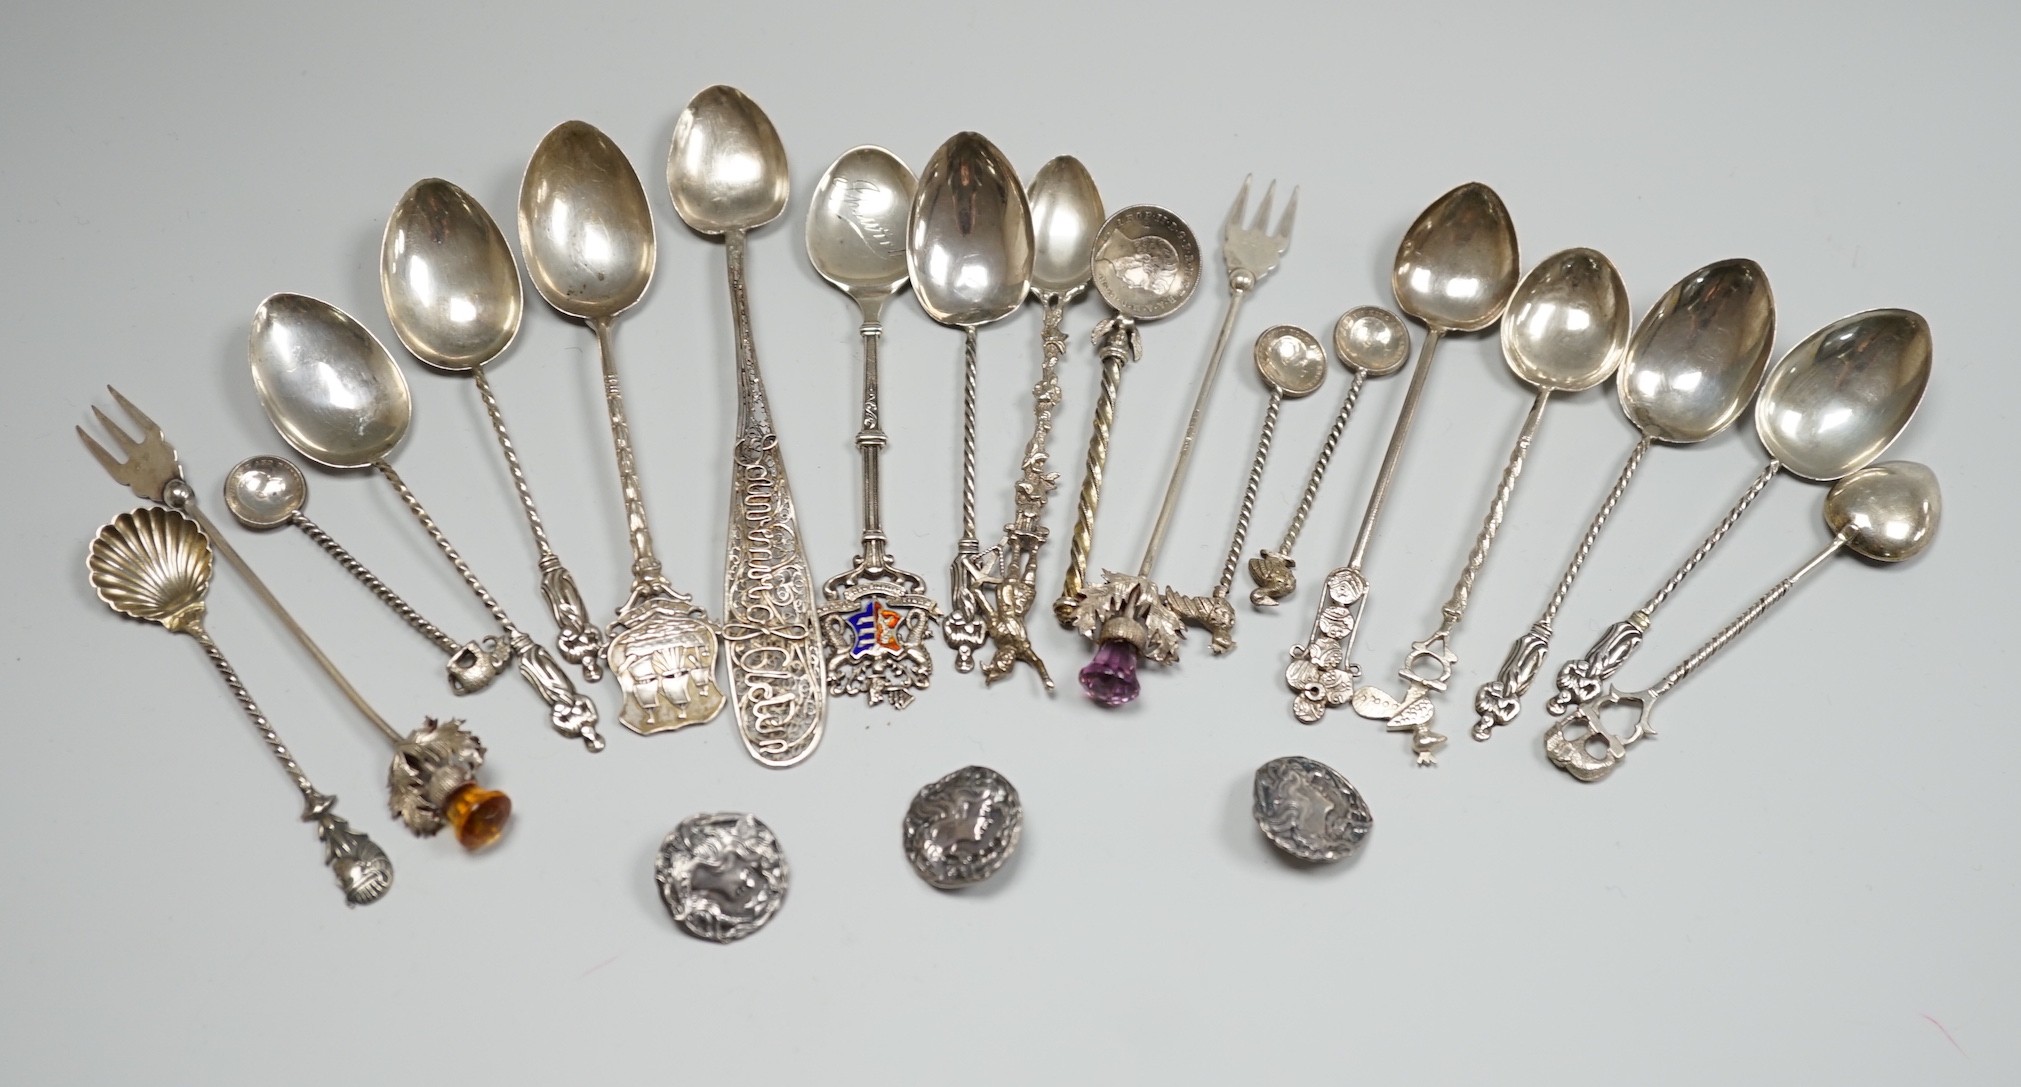 A collection of small silver and white metal spoons and forks including commemorative and three Art Nouveau silver buttons, Birmingham, 1901.